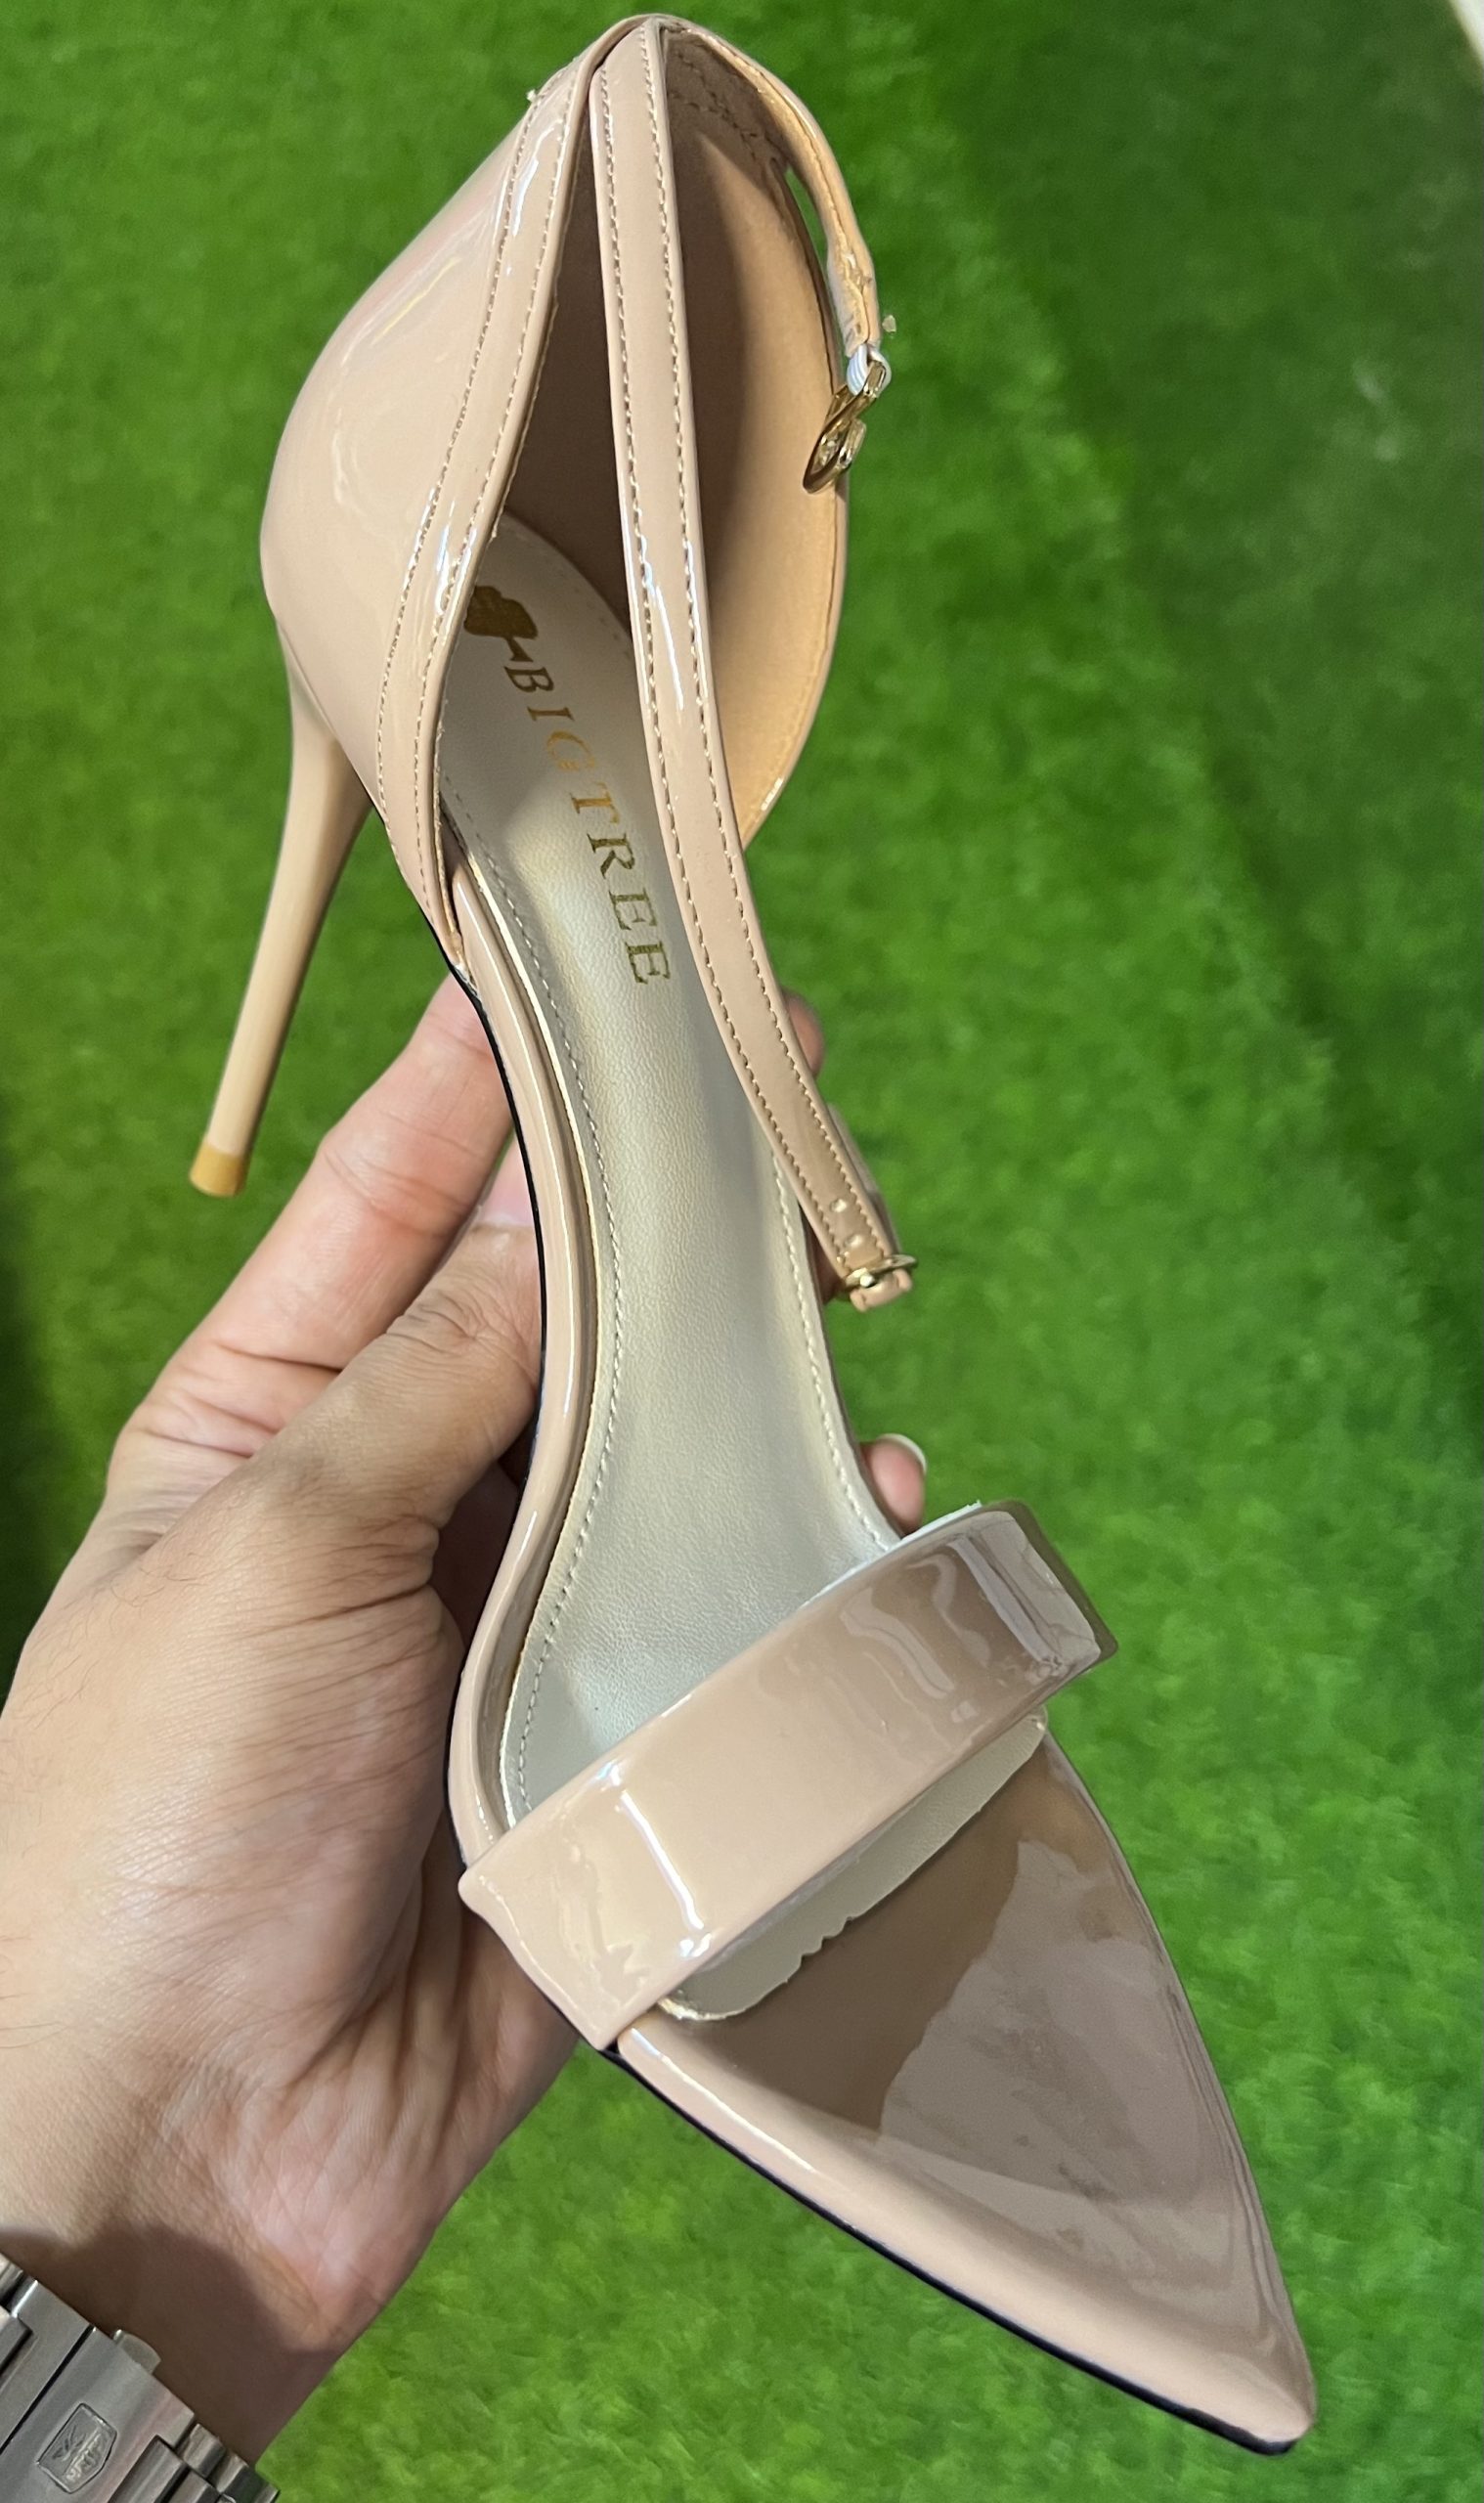 Sexy Crystal Stiletto Heels: Lady Ladies Silver Dress Shoes With Pointed  Toe For Parties, Work, And Plus Size Women From Neideng2019, $25.71 |  DHgate.Com